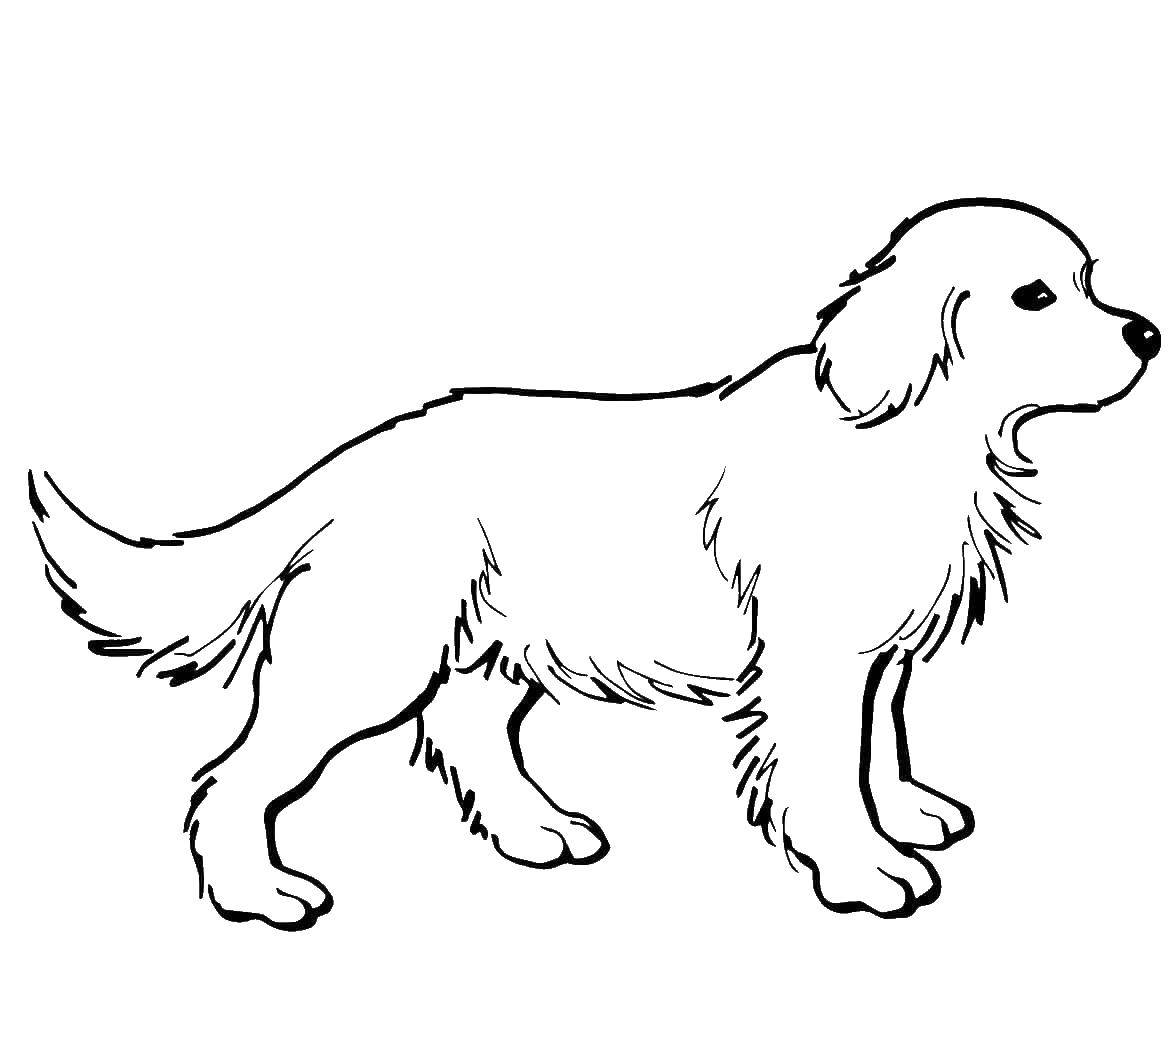 Coloring Dog. Category Pets allowed. Tags:  animals, dog, dog.